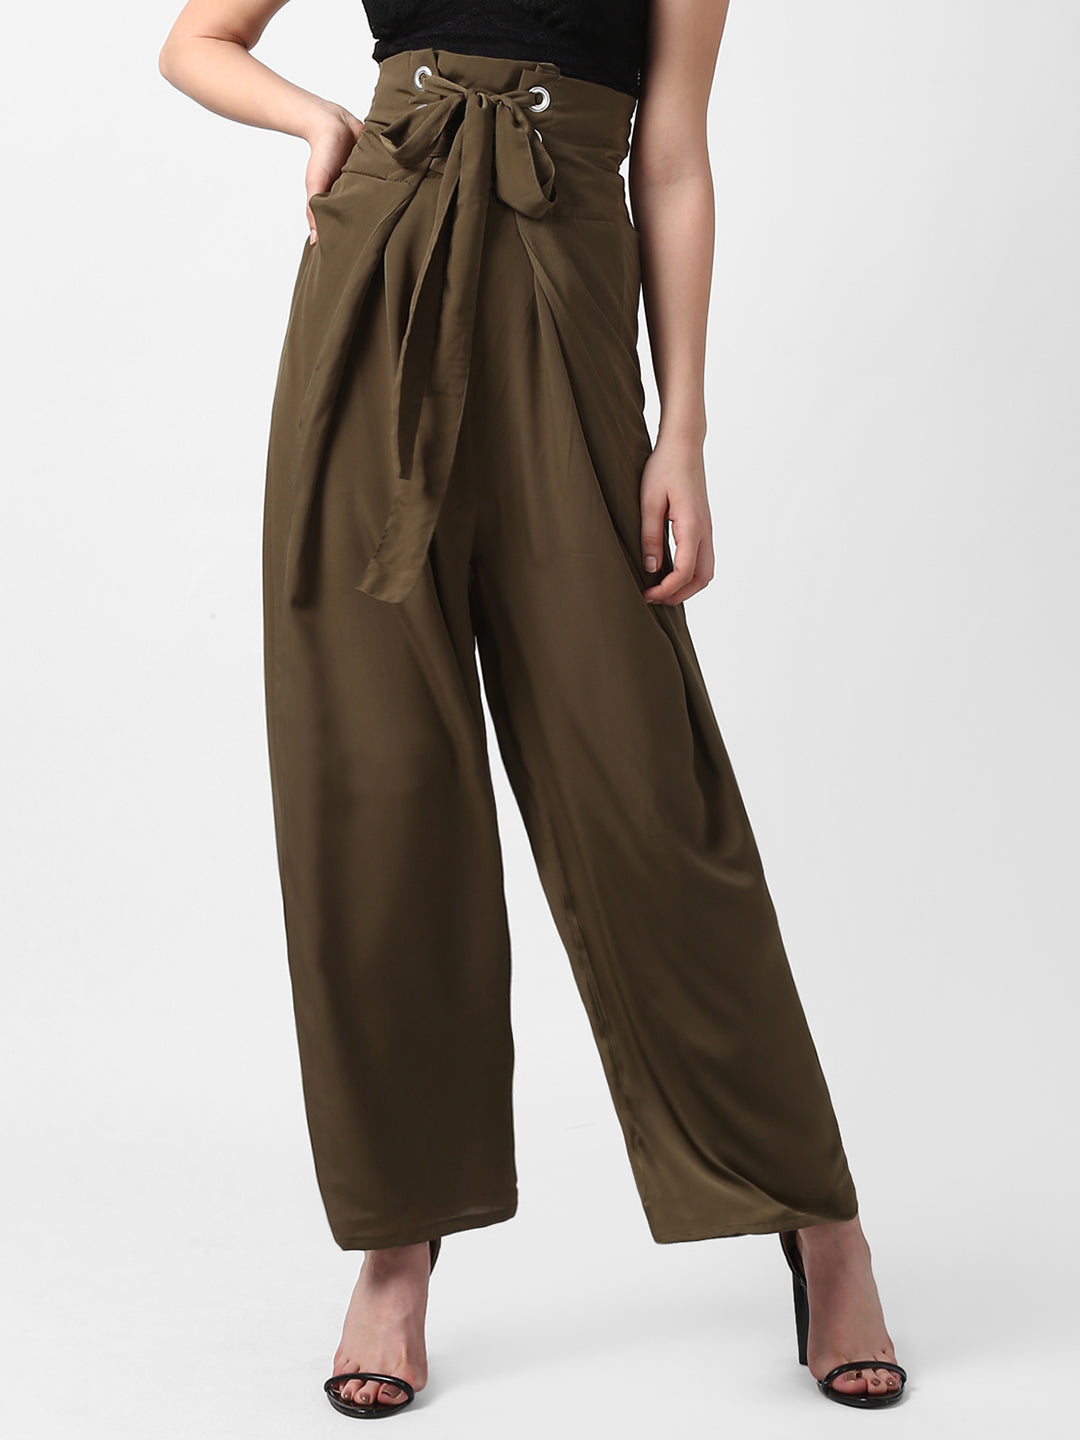 Women's Olive Polyester High Waisted Palazzo with front Rivets and Back Elastic